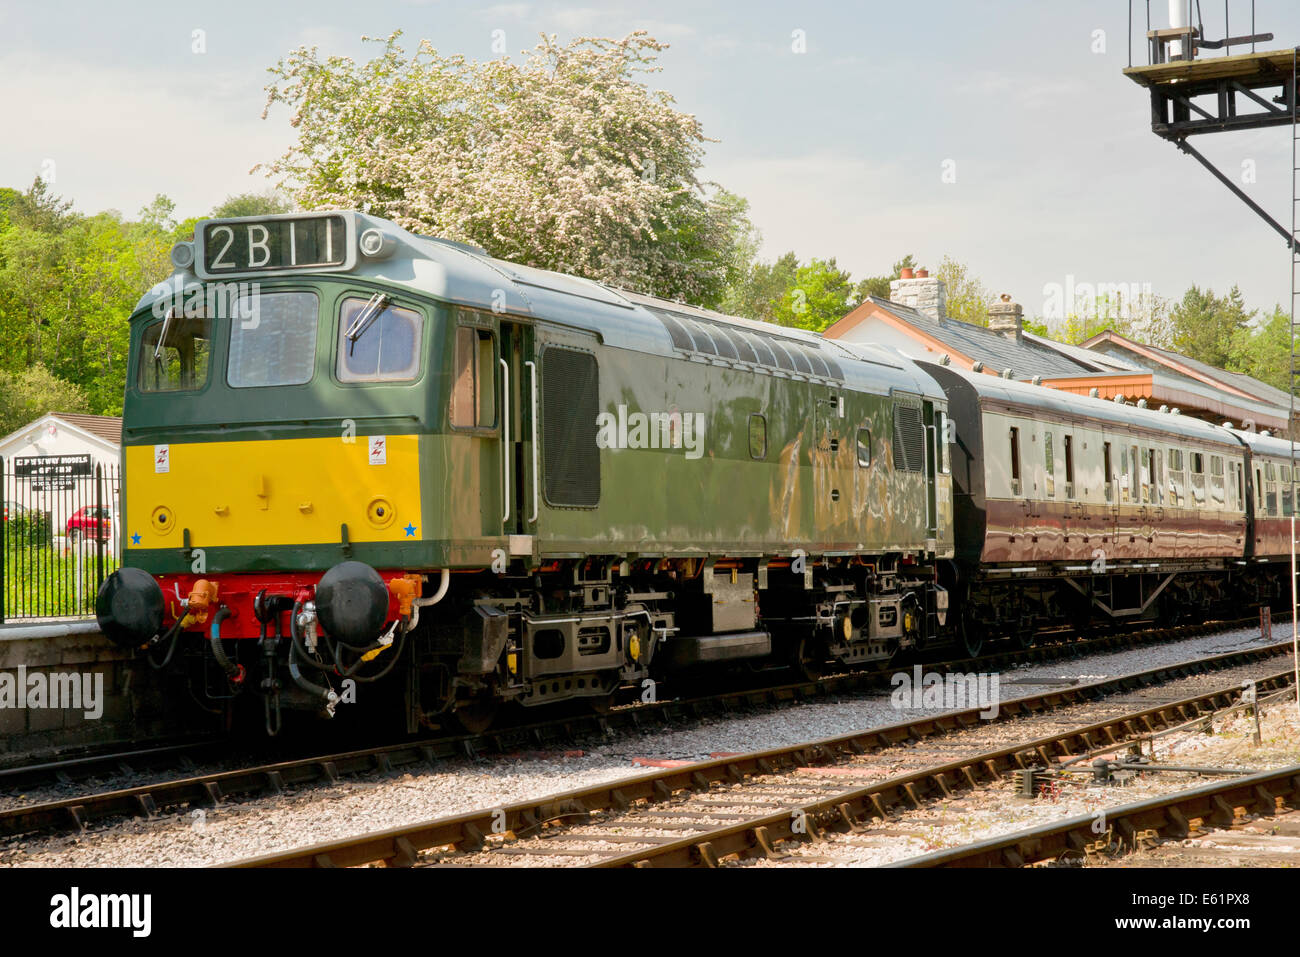 A Type 2 diesel green locomotive sitting in the station at Buckfastleigh Stock Photo